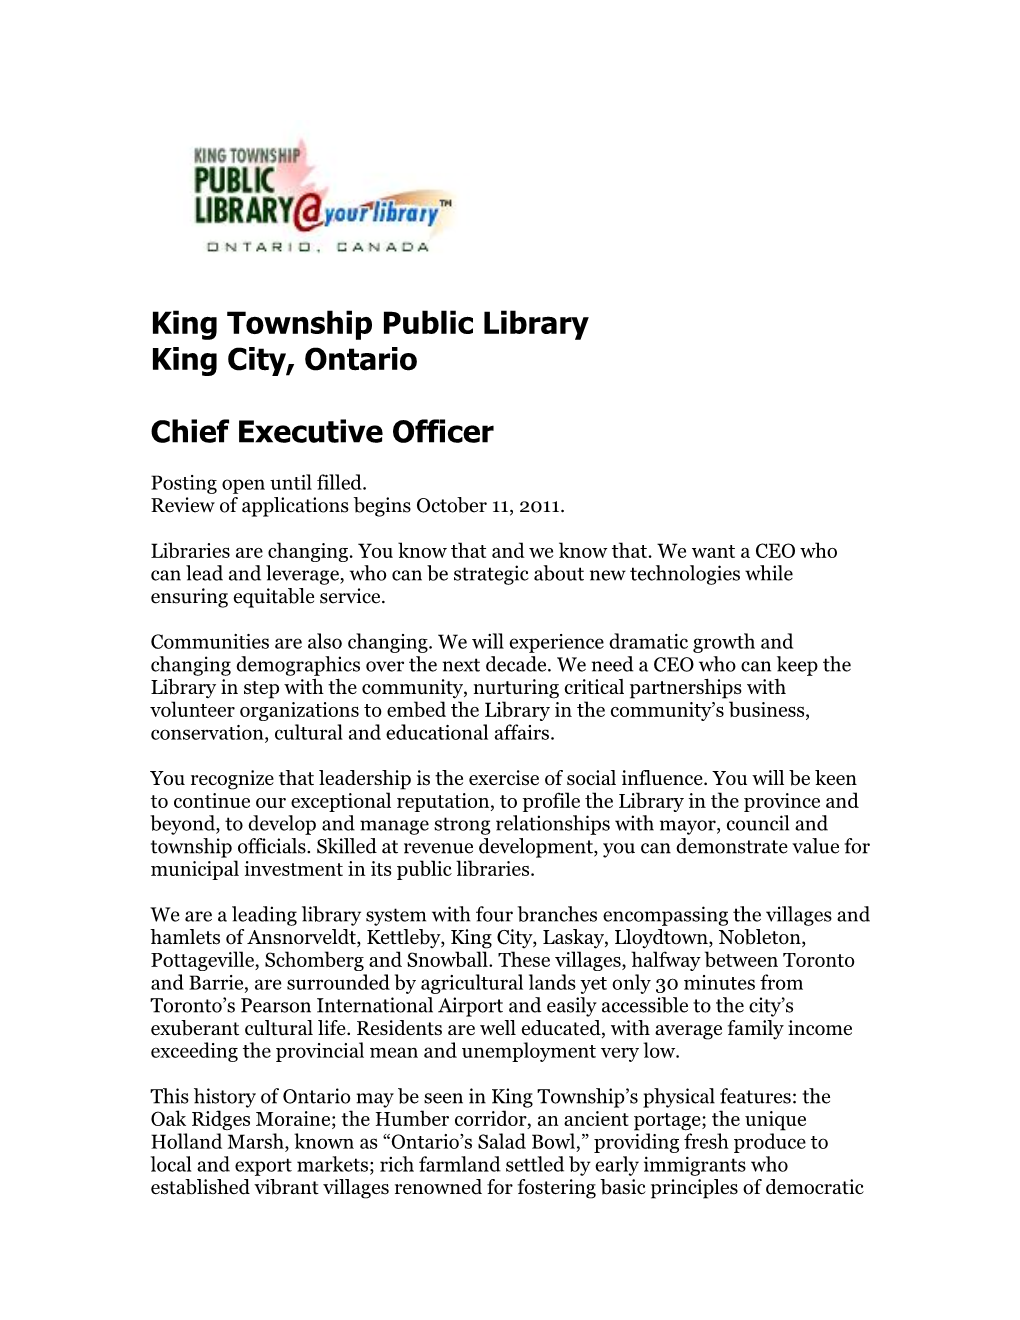 King Township Public Library King City, Ontario Chief Executive Officer